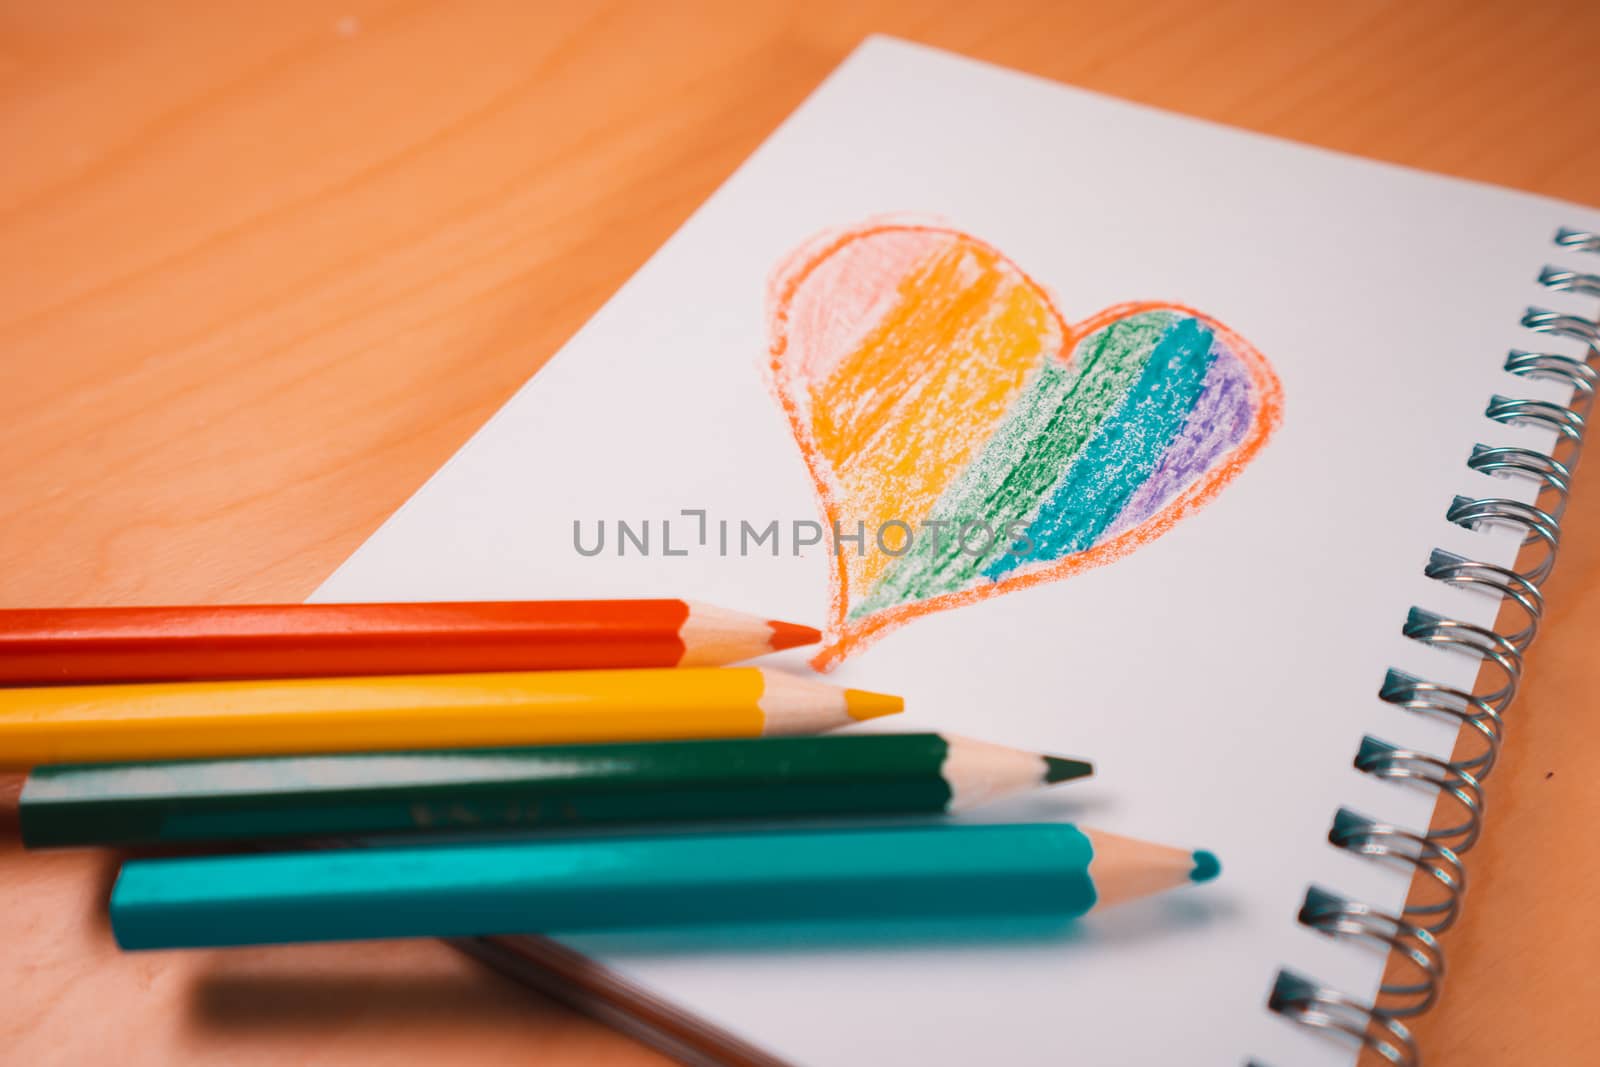 Heart with the colors of the LGTBI or GLBT flag on a blank notebook with rainbow pens. Copy space to add some text or graphics